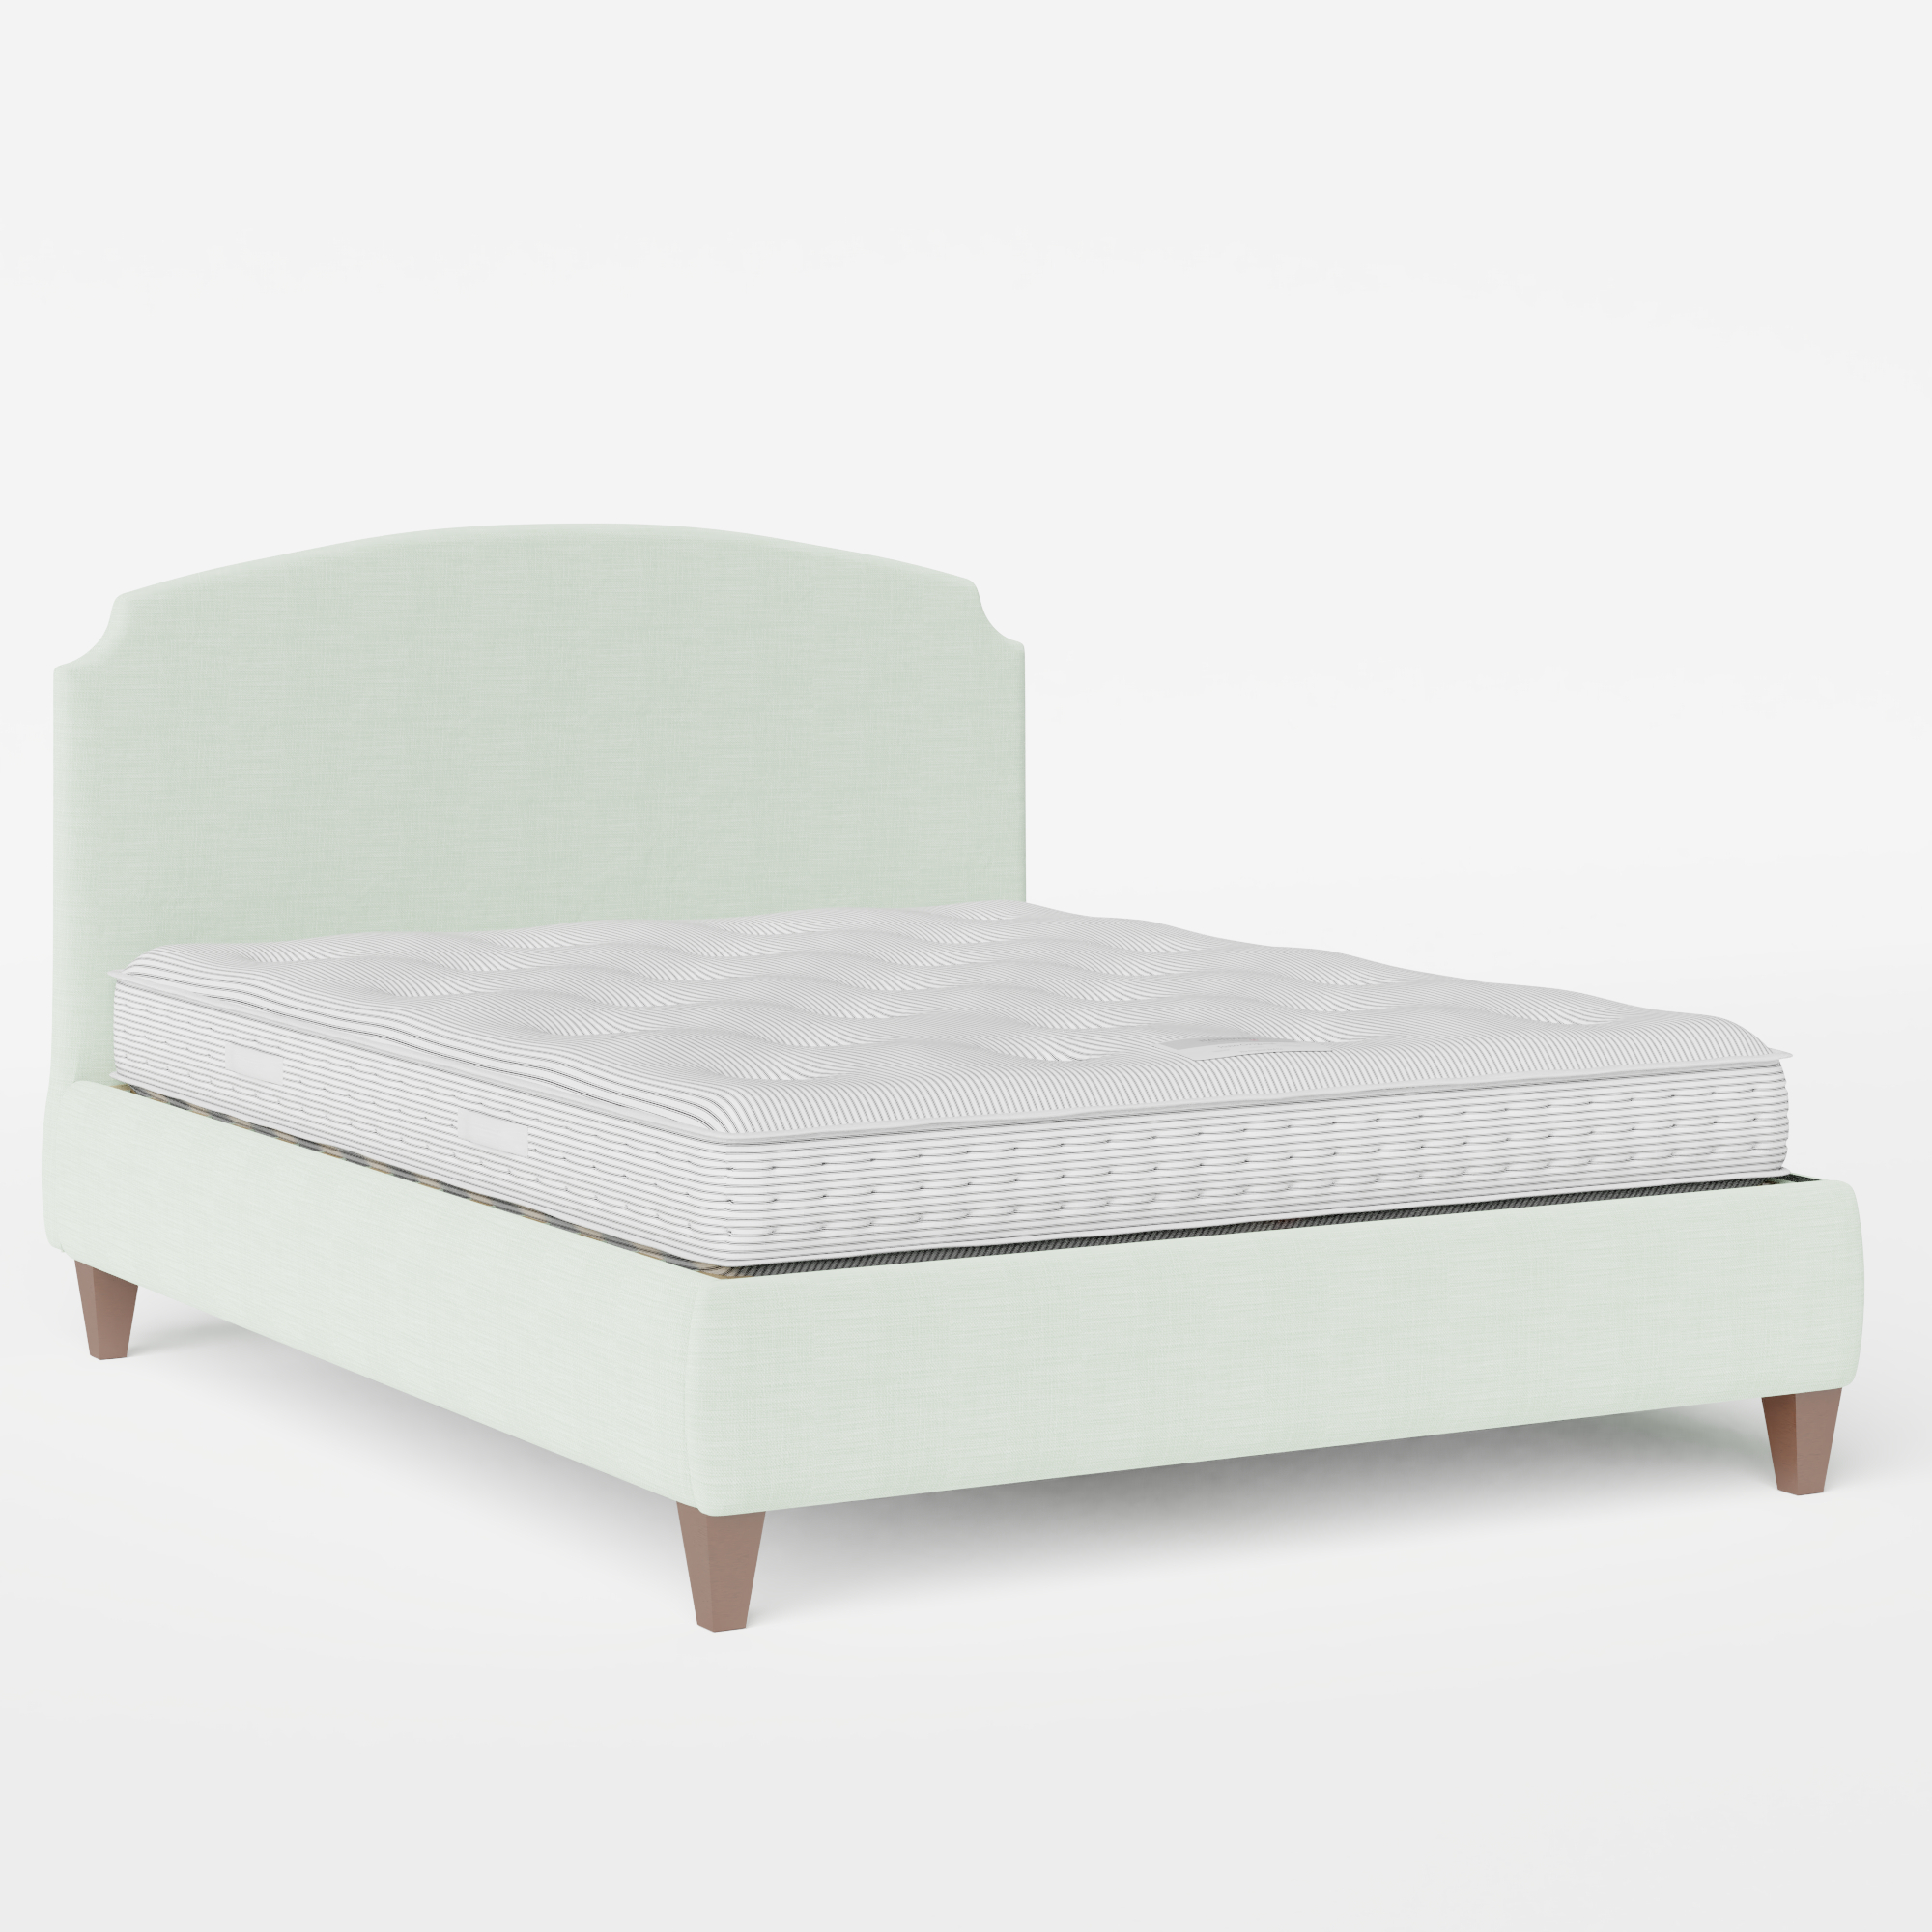 Lide upholstered bed in duckegg fabric